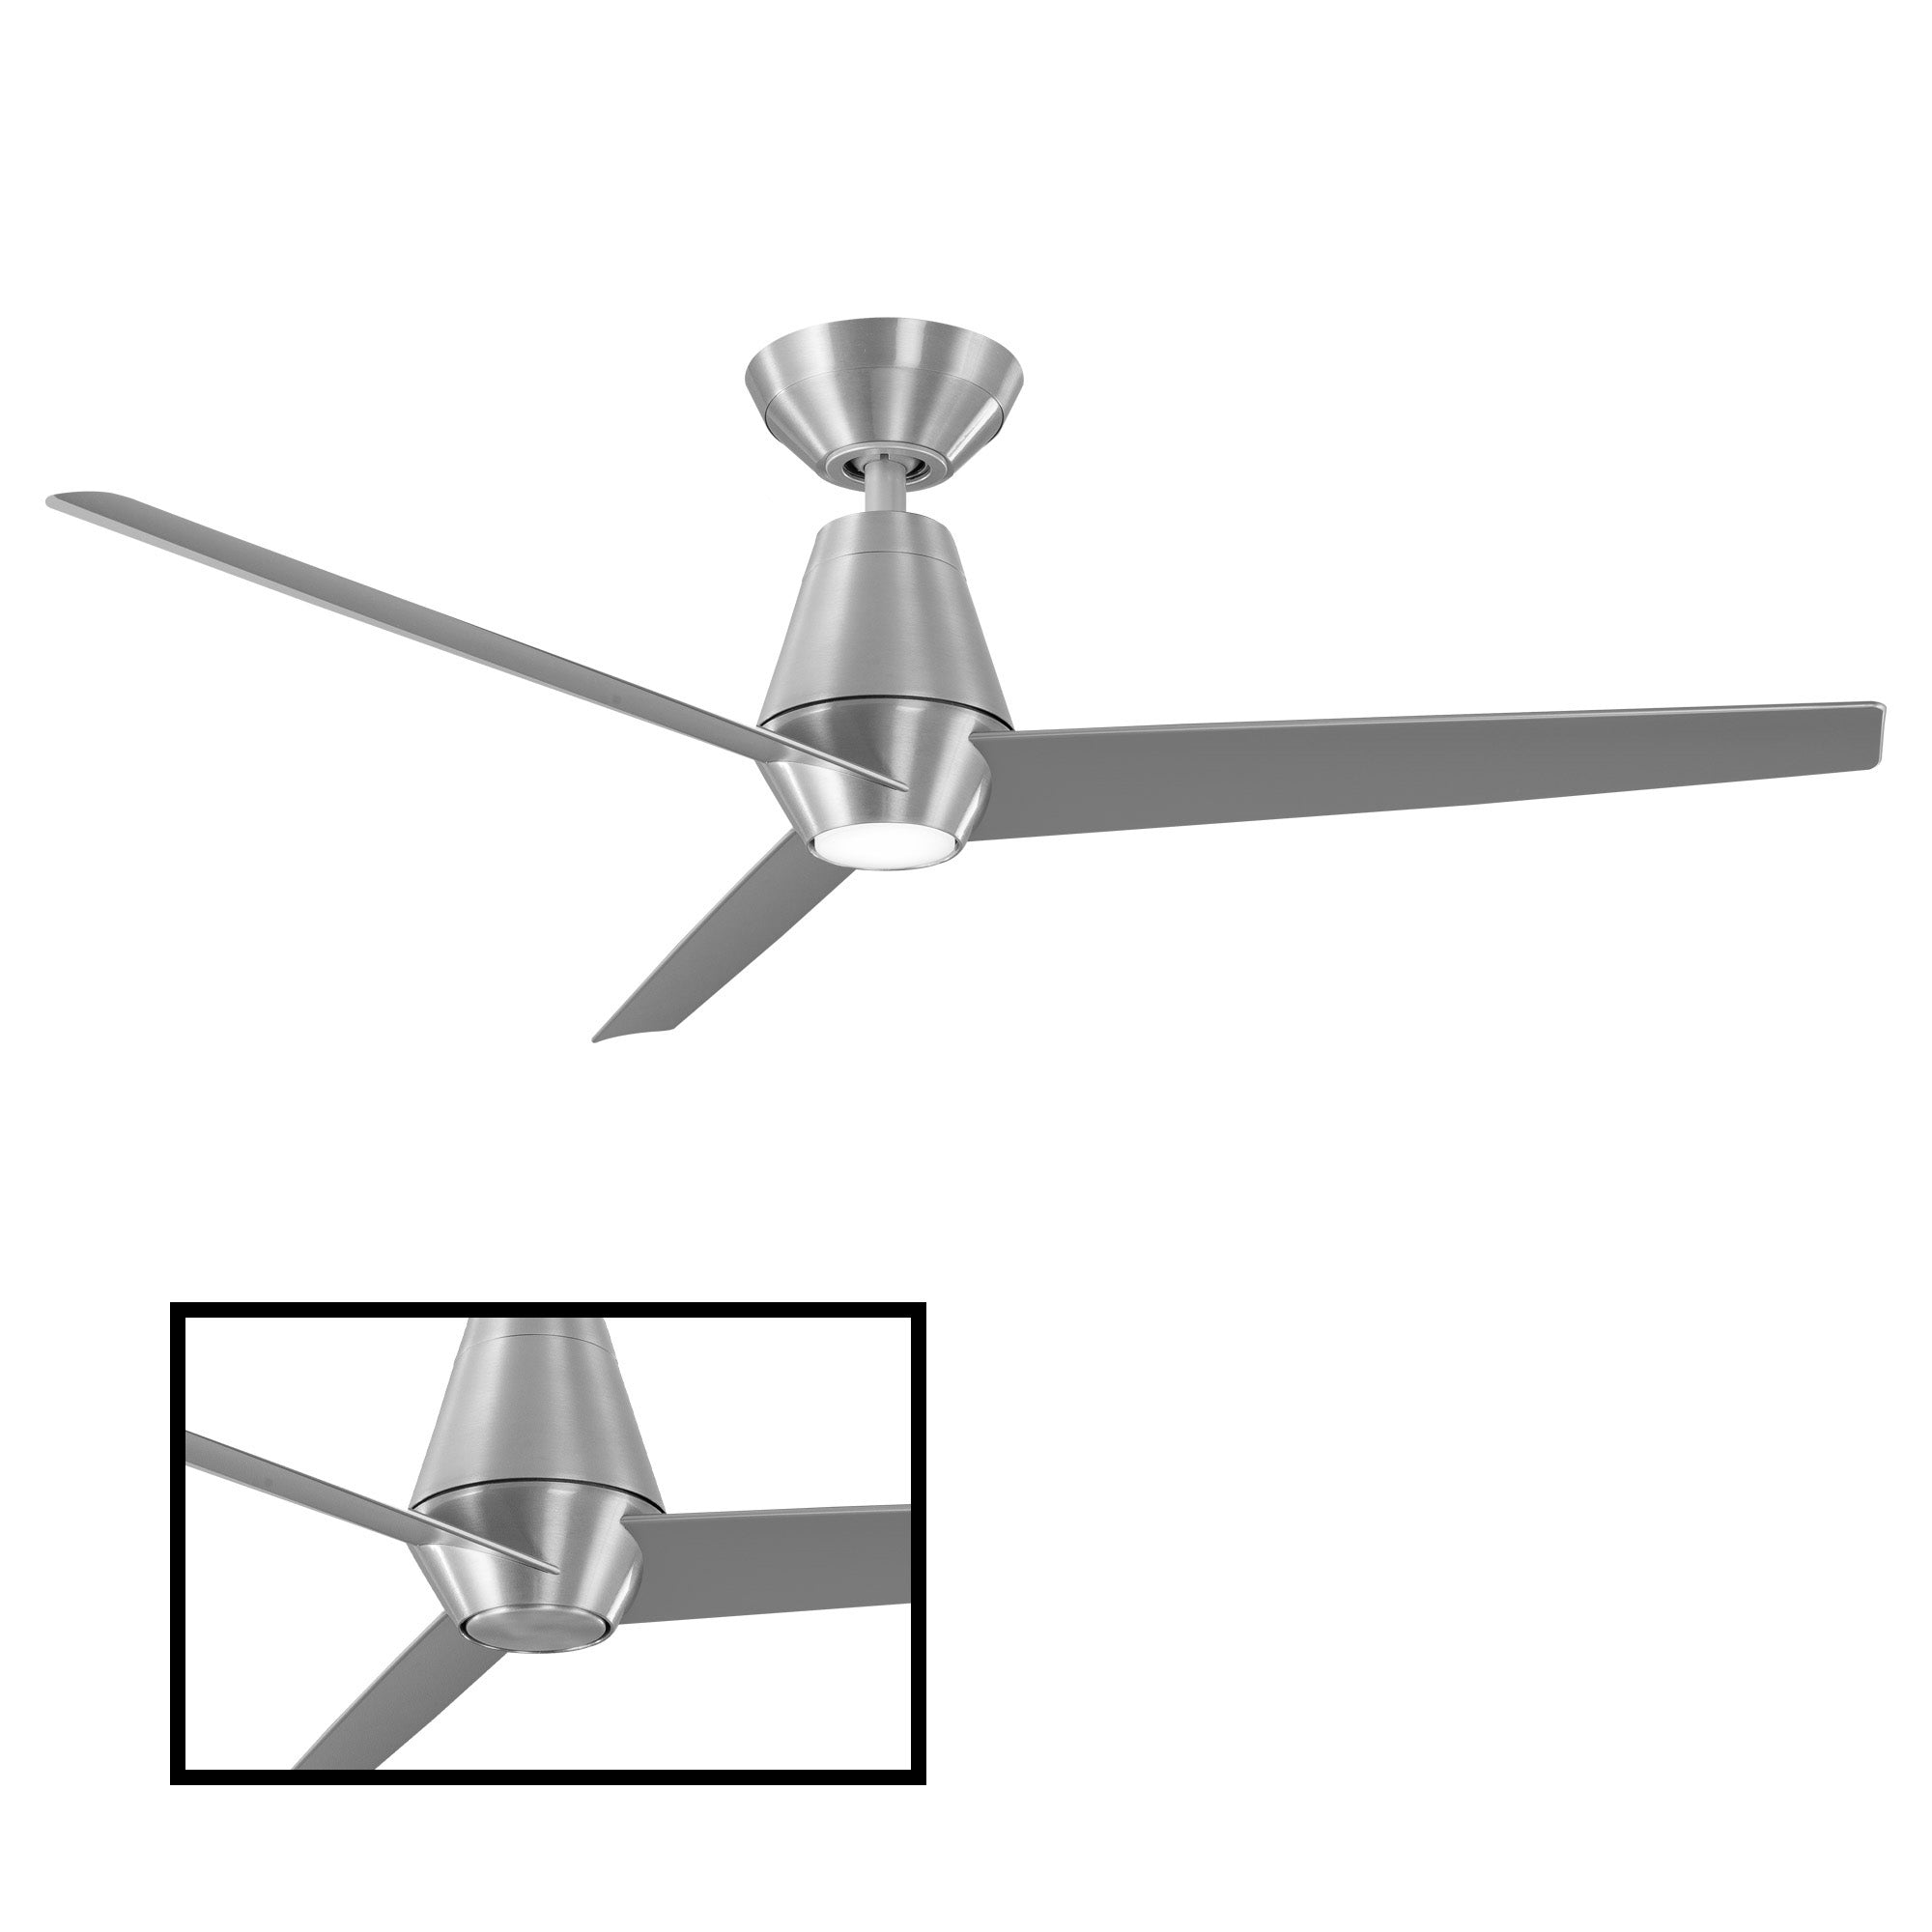 Slim Indoor/Outdoor 3-Blade 52" Smart Ceiling Fan with LED Light Kit and Remote Control